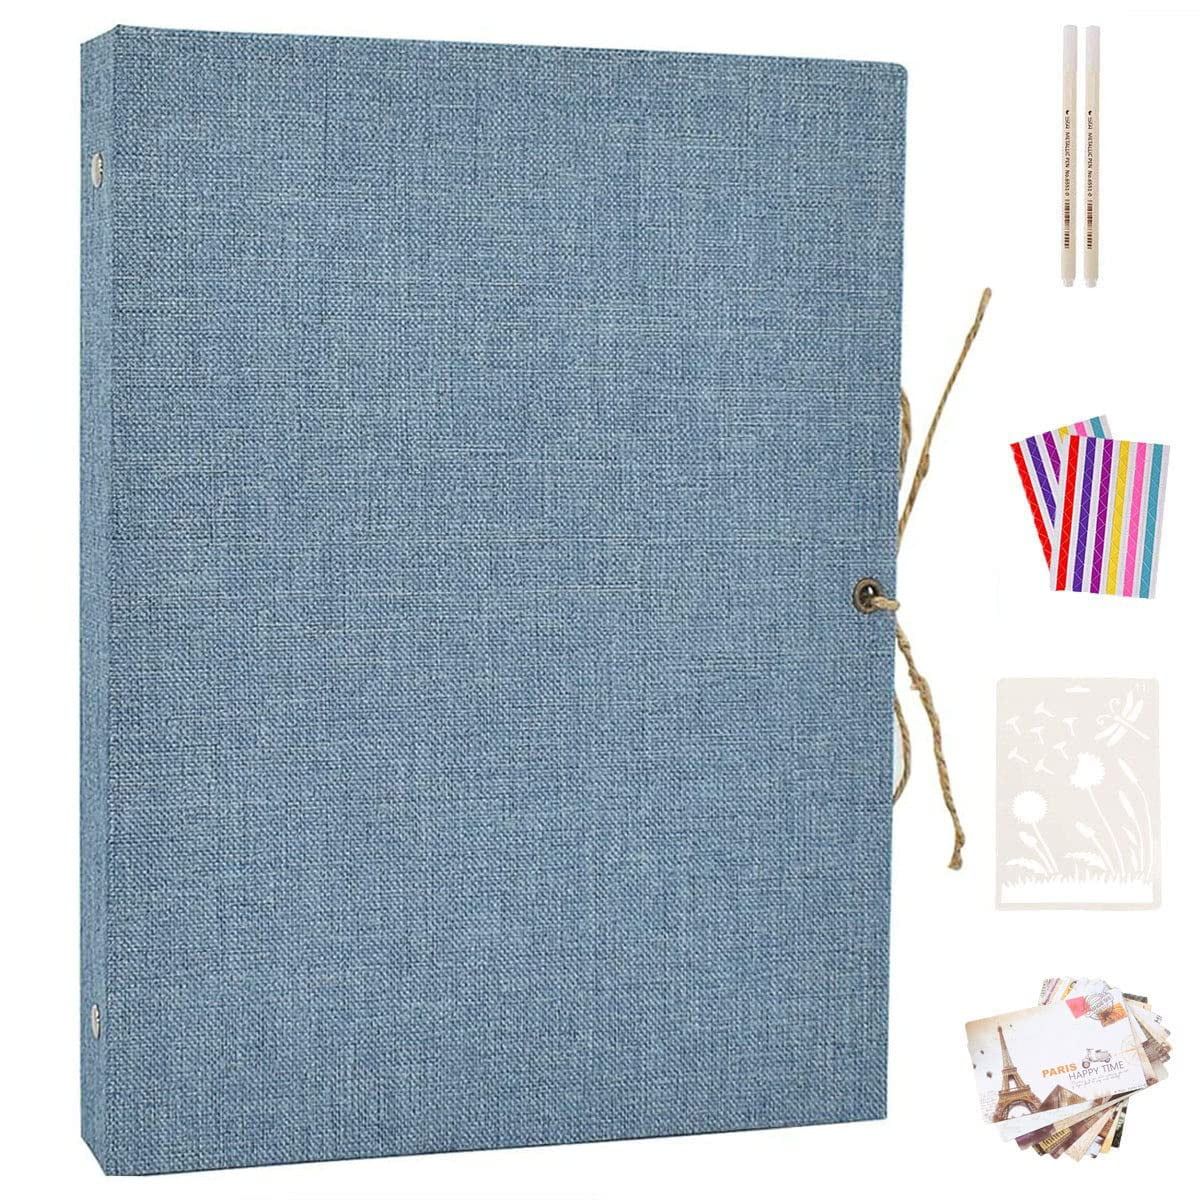 Mlfire 80 Pages Scrapbook Photo Albums DIY Handmade Scrapbooking Kits Souvenir Album with 6 Metallic Pens Gifts for Baby Child Wedding Travel Festival